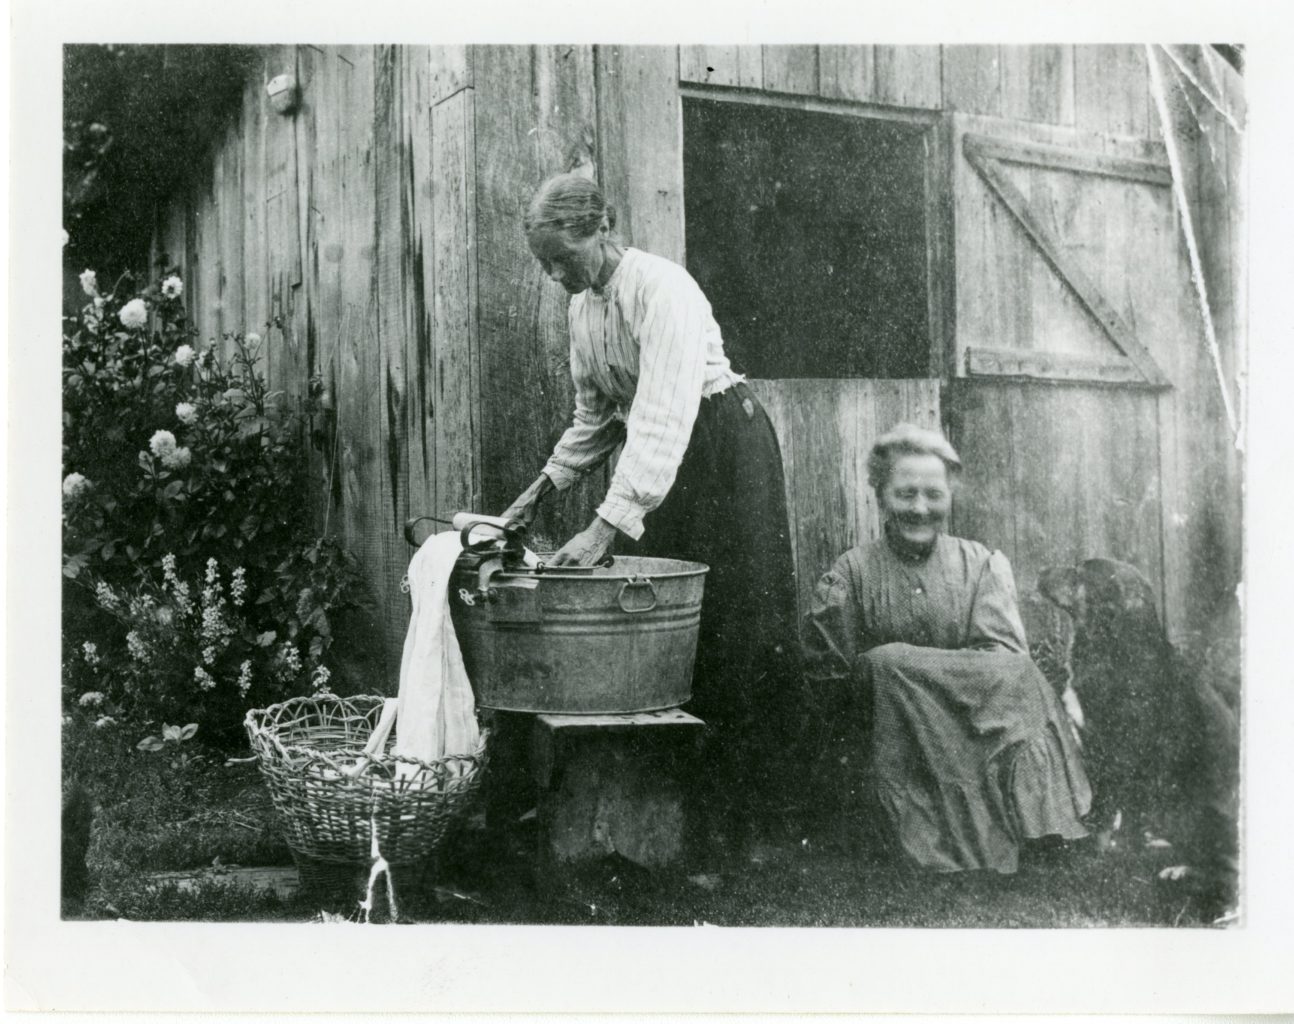 Mrs. Bruflodt and Anne Gausta outside of farm. Mrs. Bruflodt washes clothes, while Anne sits beside with dog.